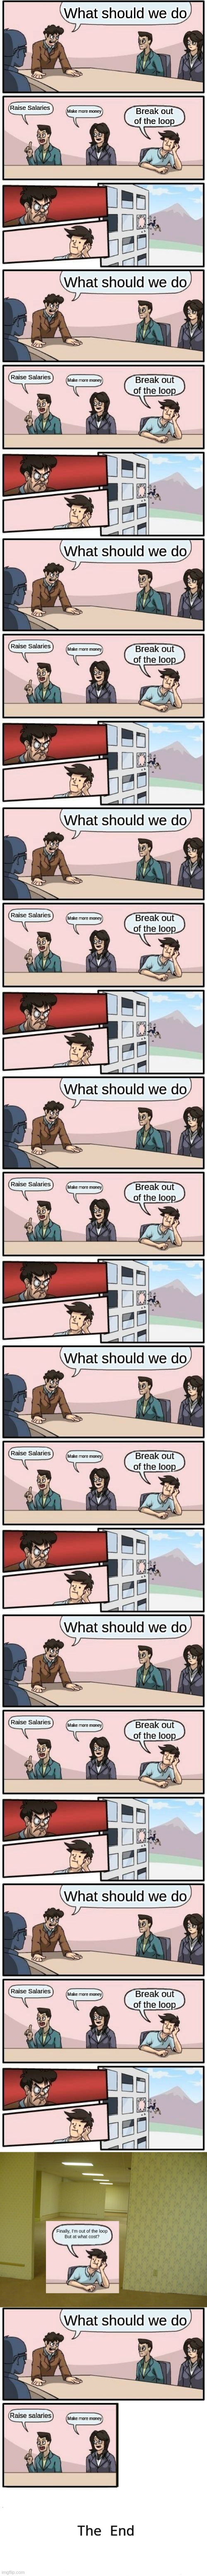 What should we do; Raise Salaries; Make more money; Break out of the loop | image tagged in memes,boardroom meeting suggestion | made w/ Imgflip meme maker